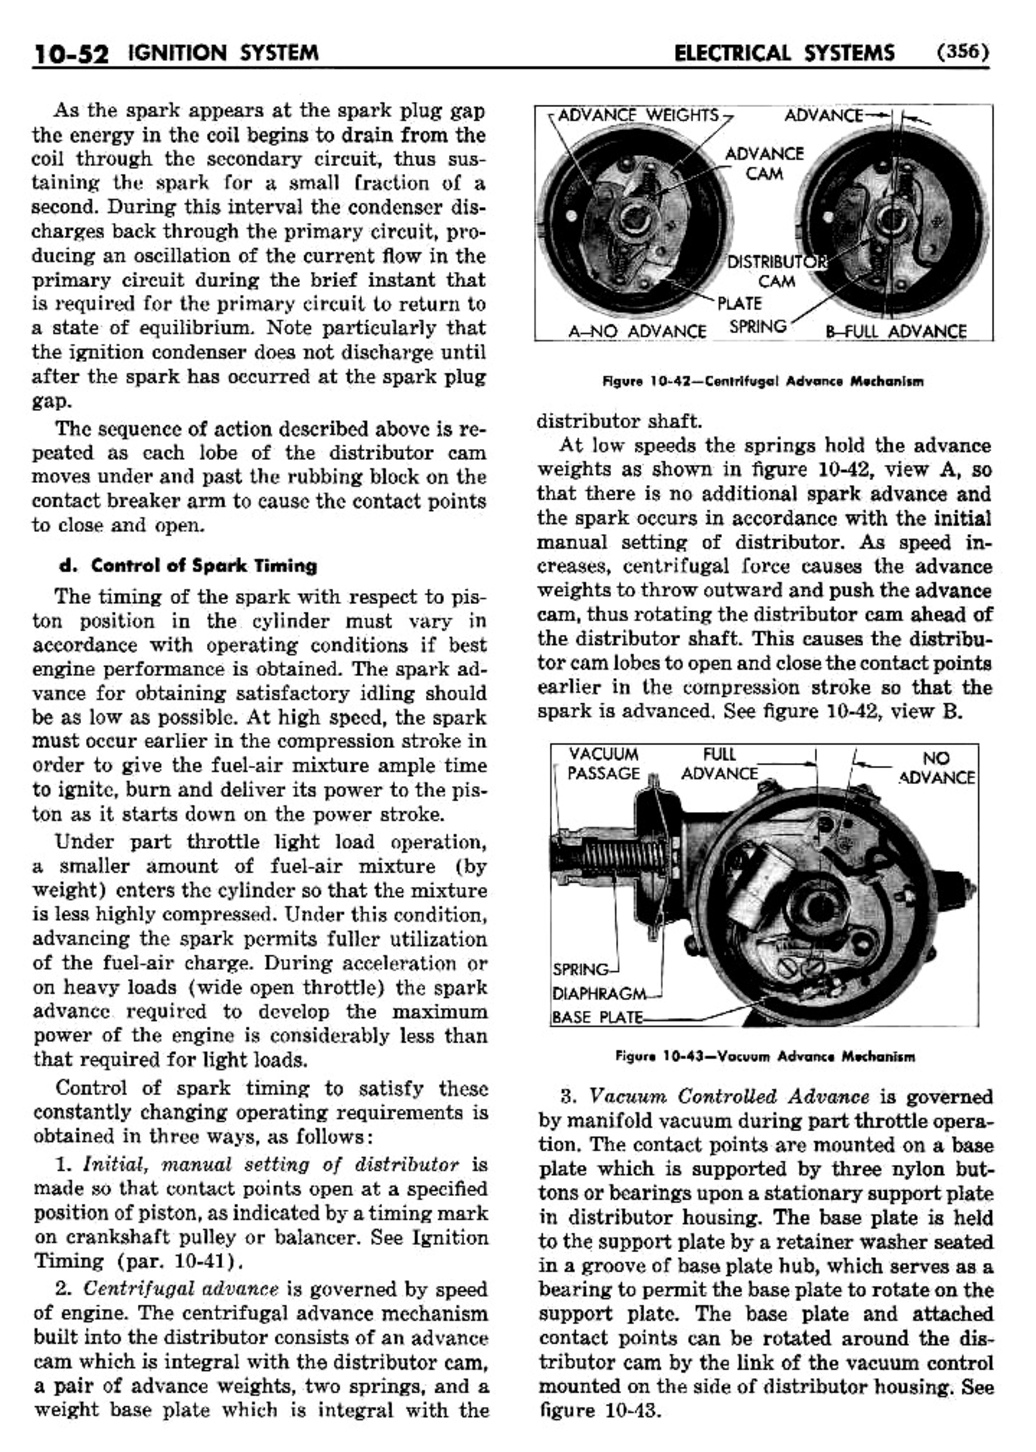 n_11 1955 Buick Shop Manual - Electrical Systems-052-052.jpg